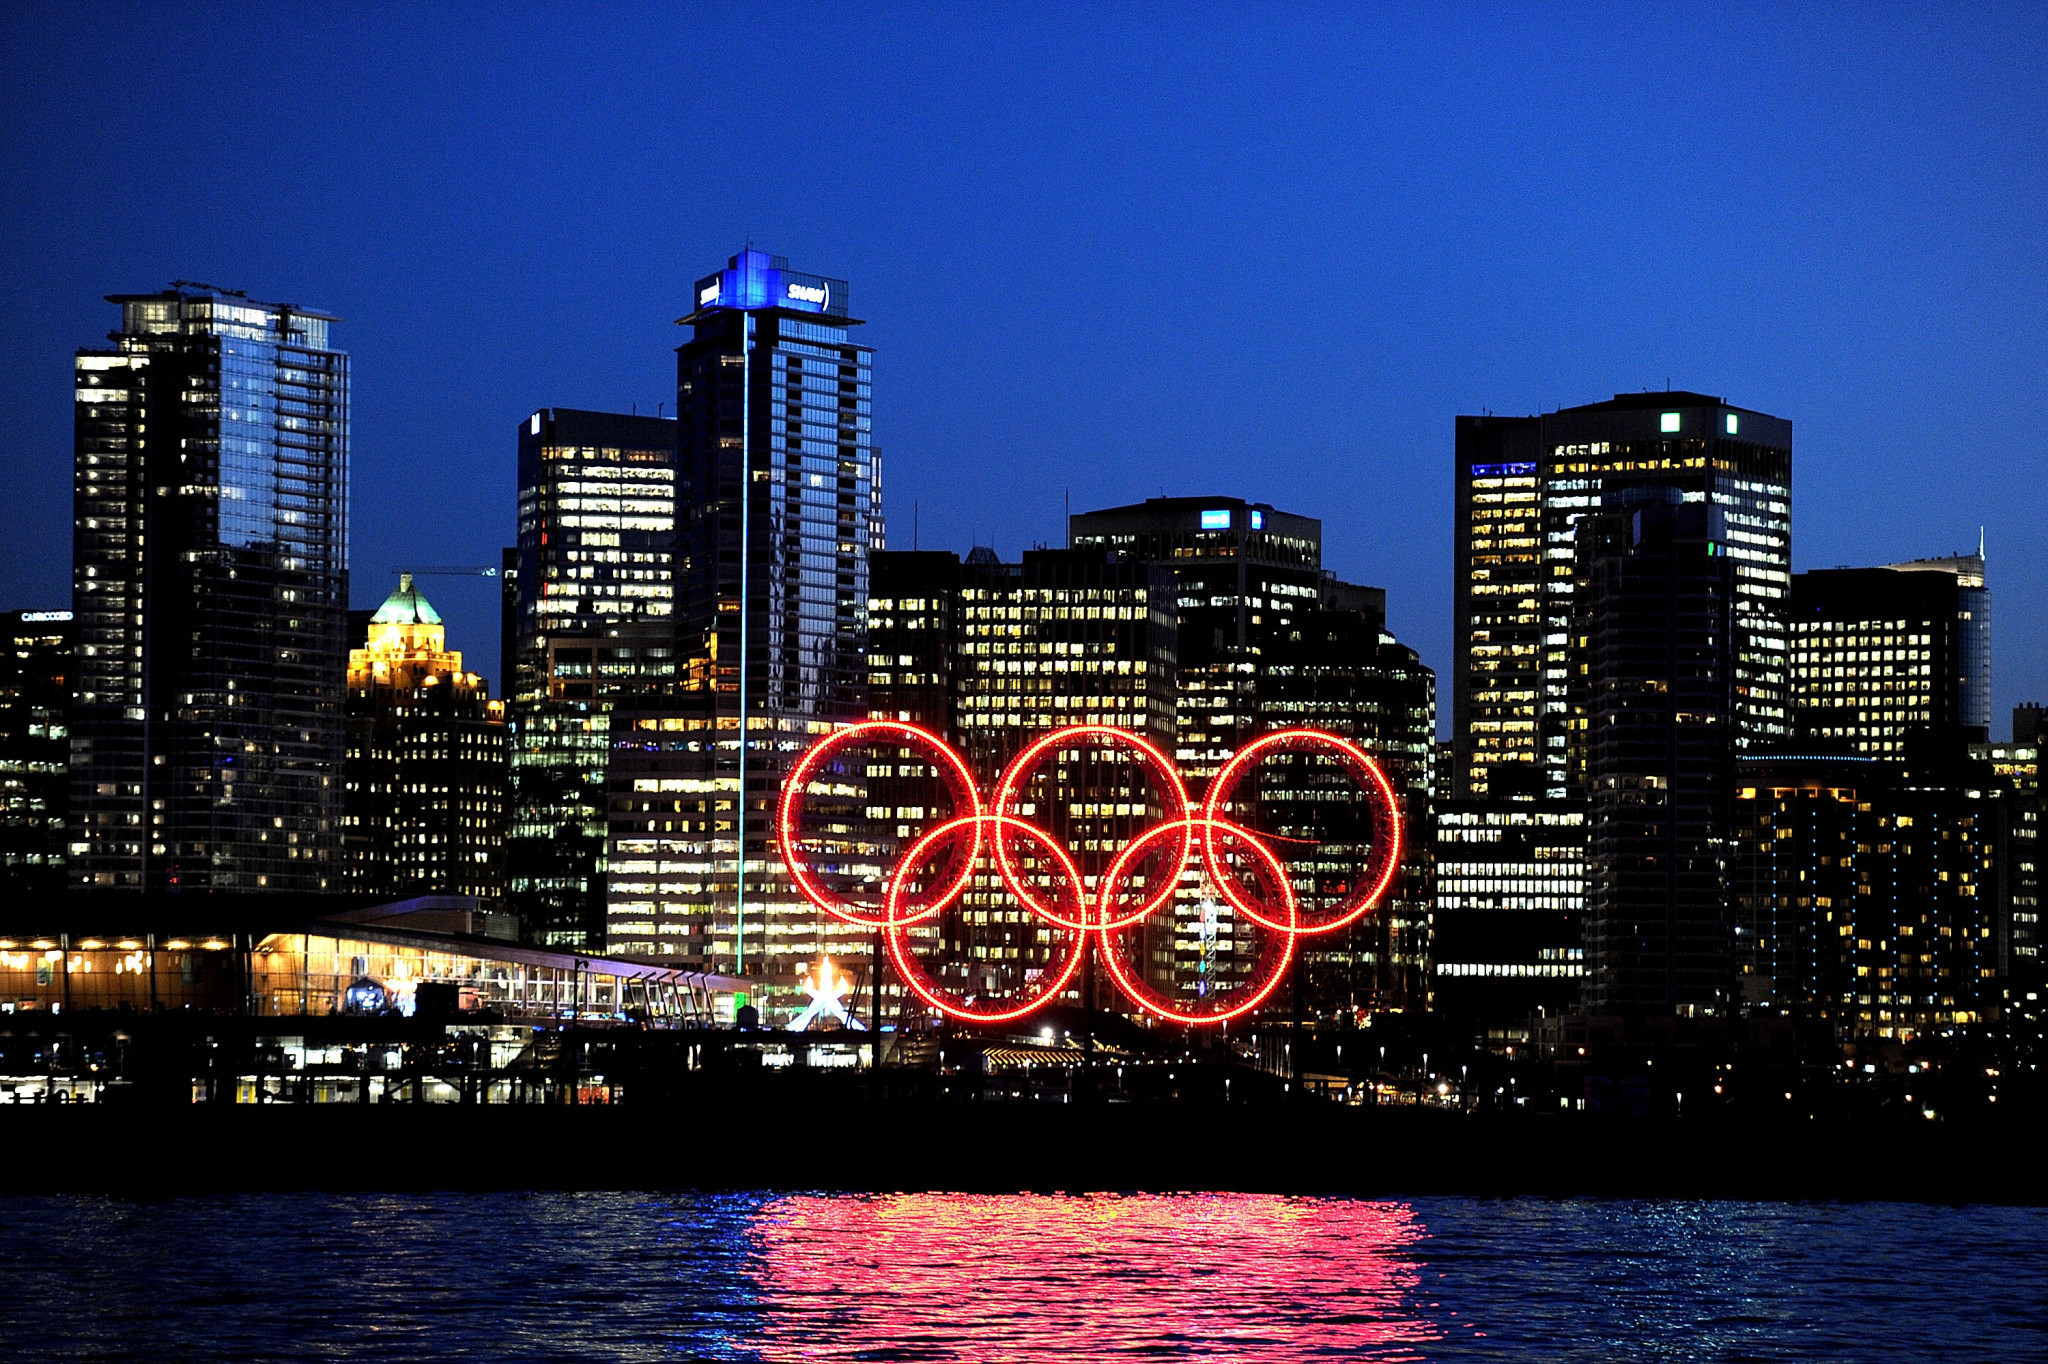 A public vote was held prior to Vancouver's successful bid for the 2010 Winter Olympics ©Getty Images